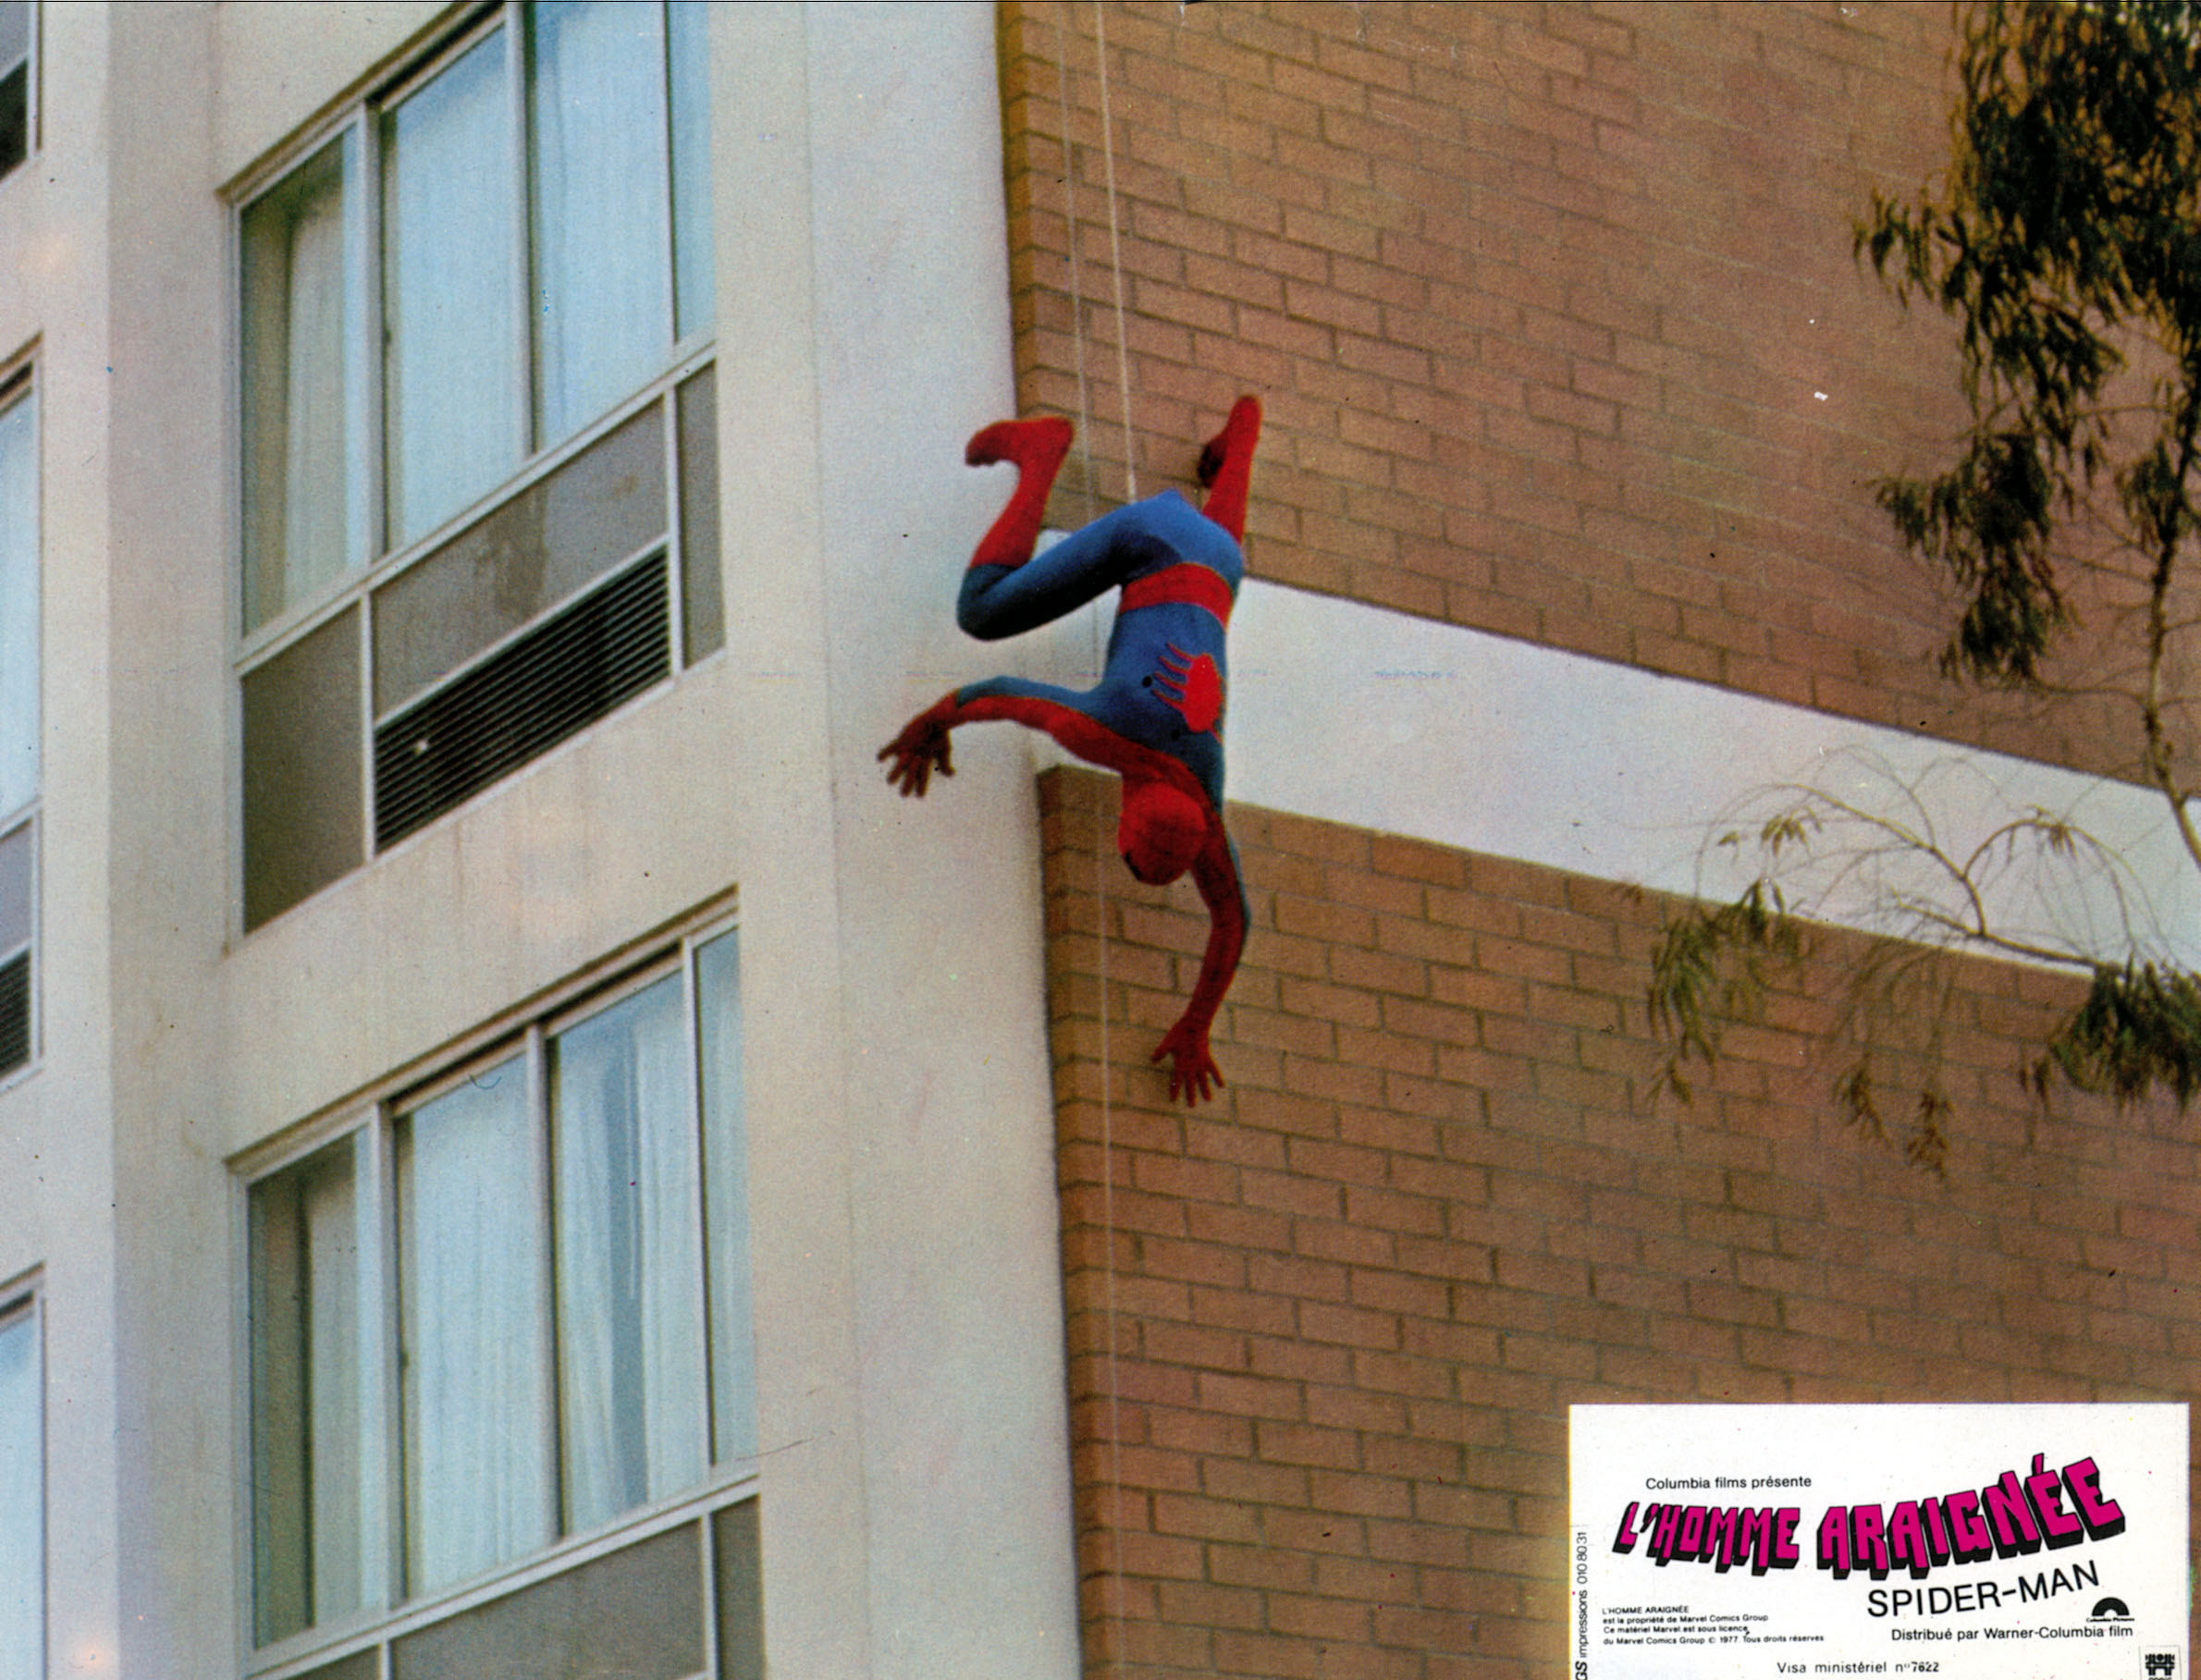 Spider-Man crawls down the wall of a building